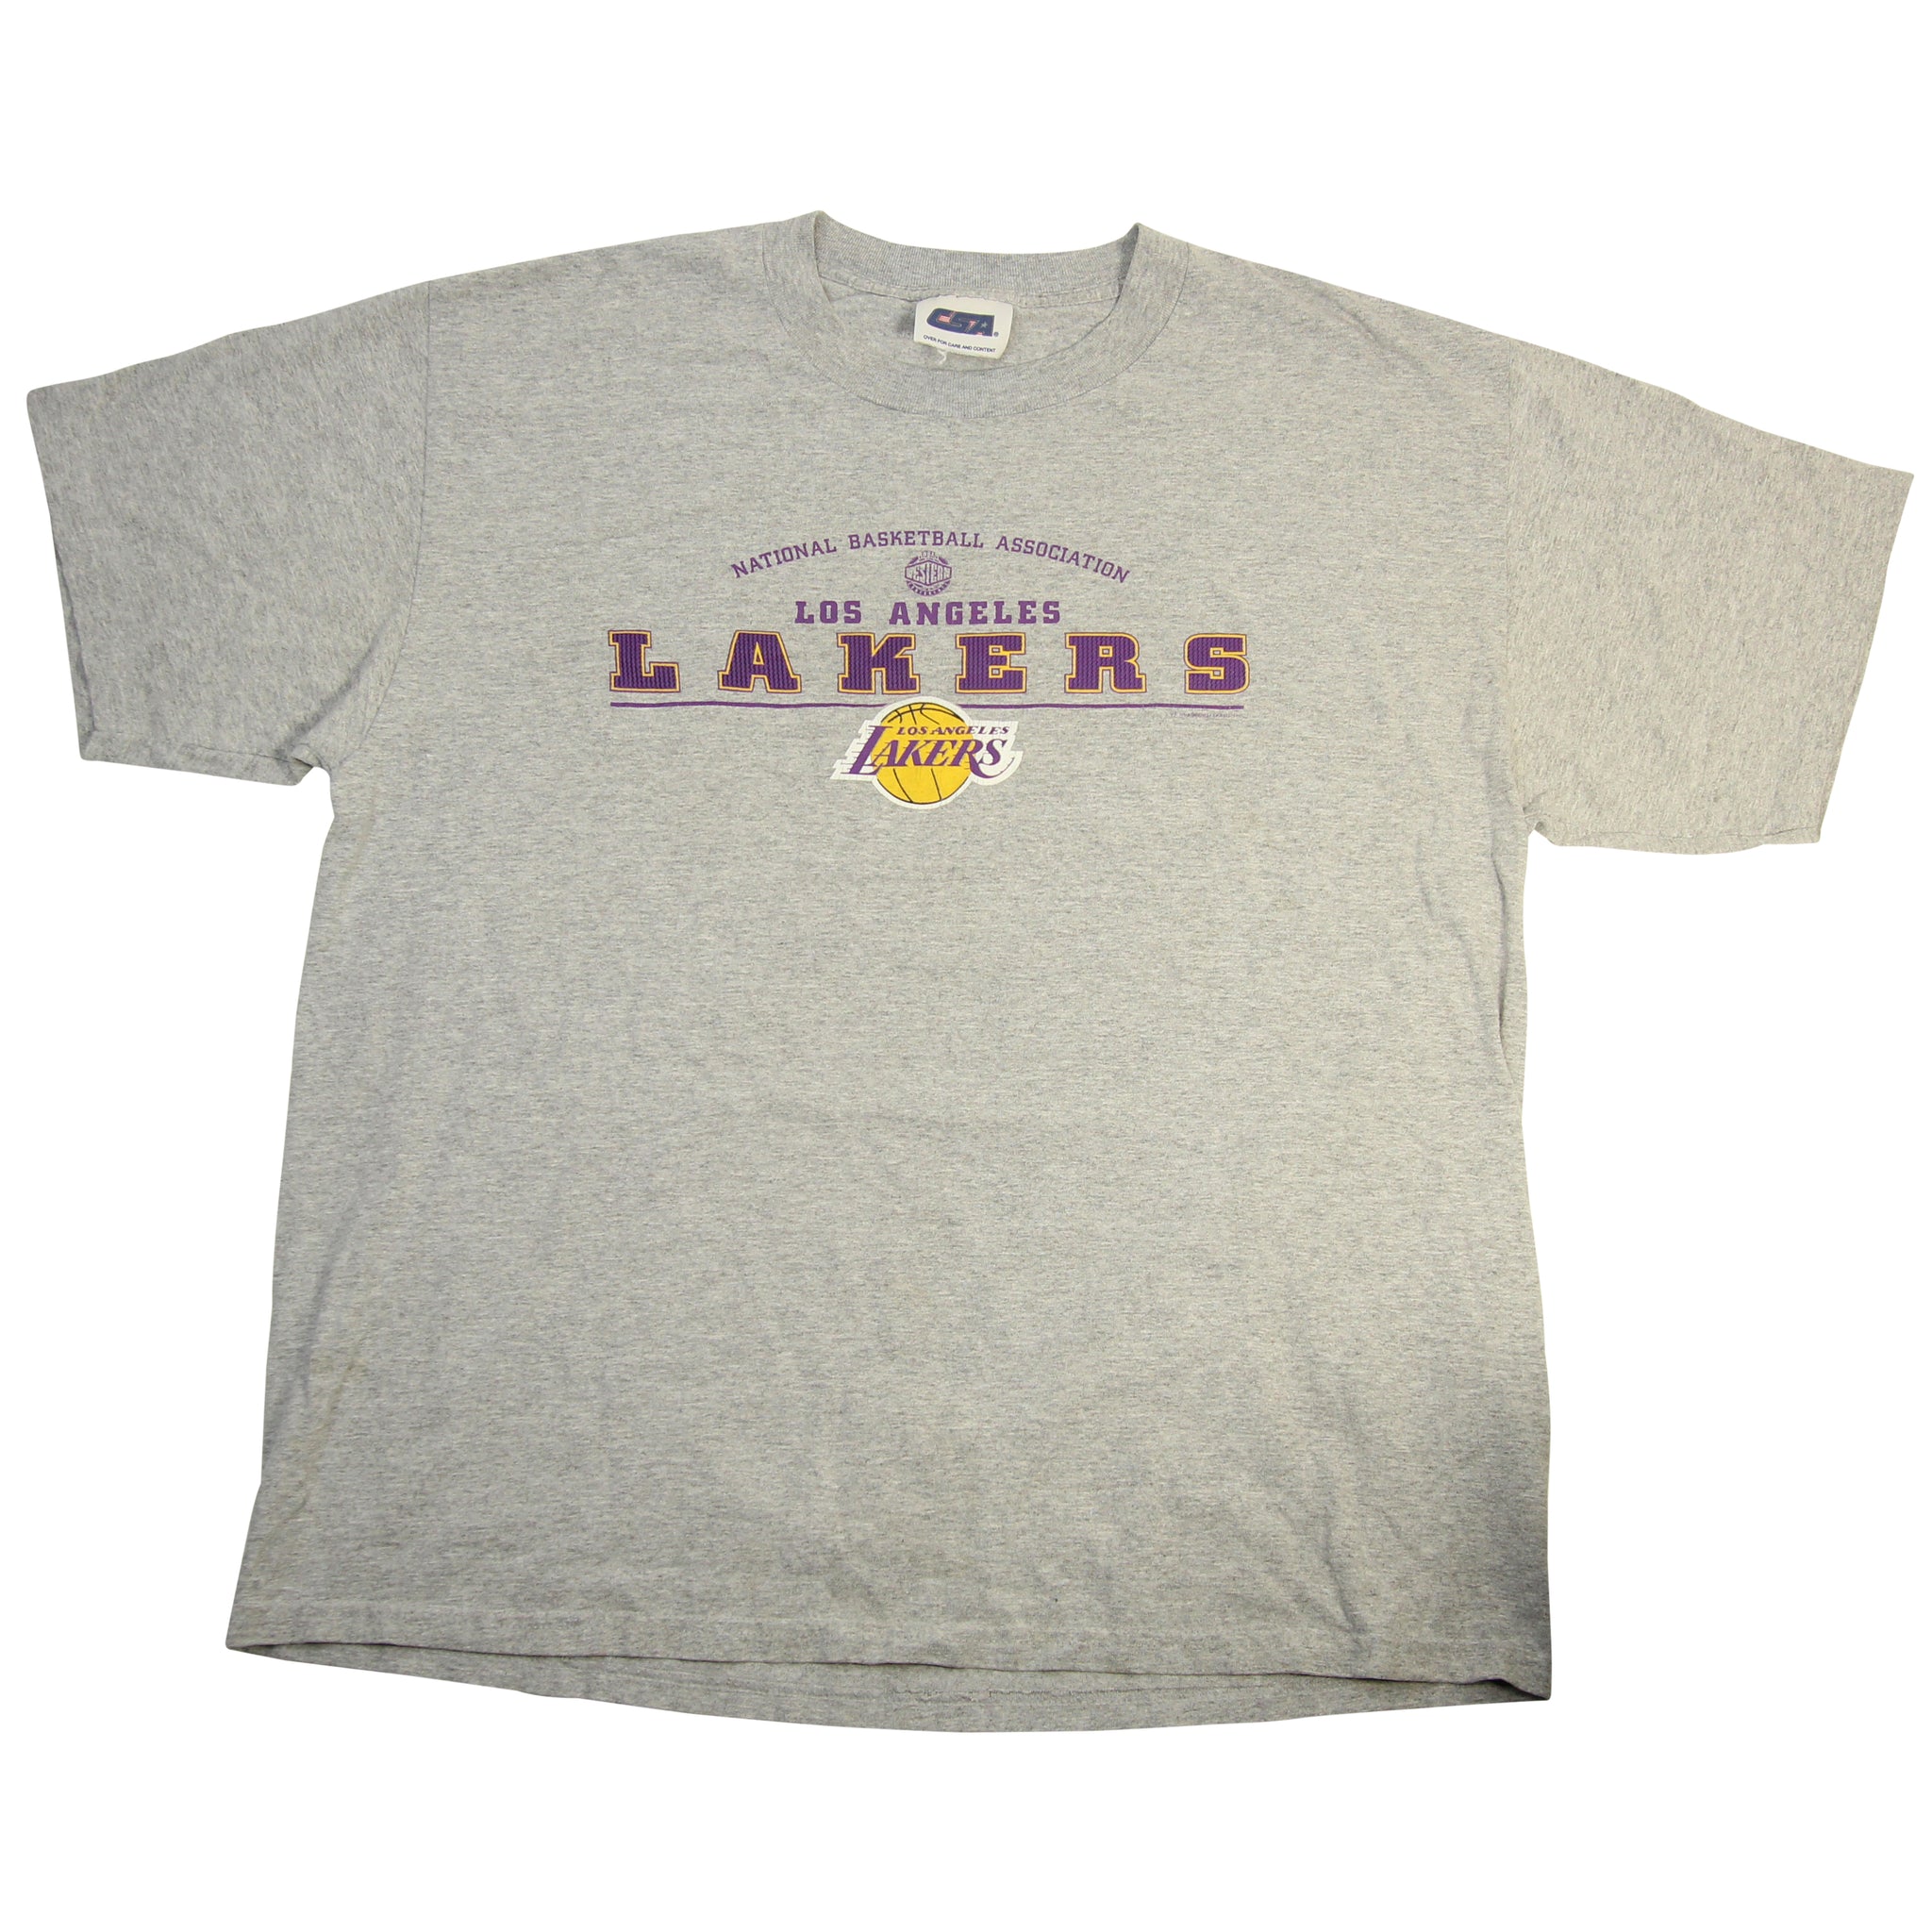 Los Angeles Lakers Graphic Tee